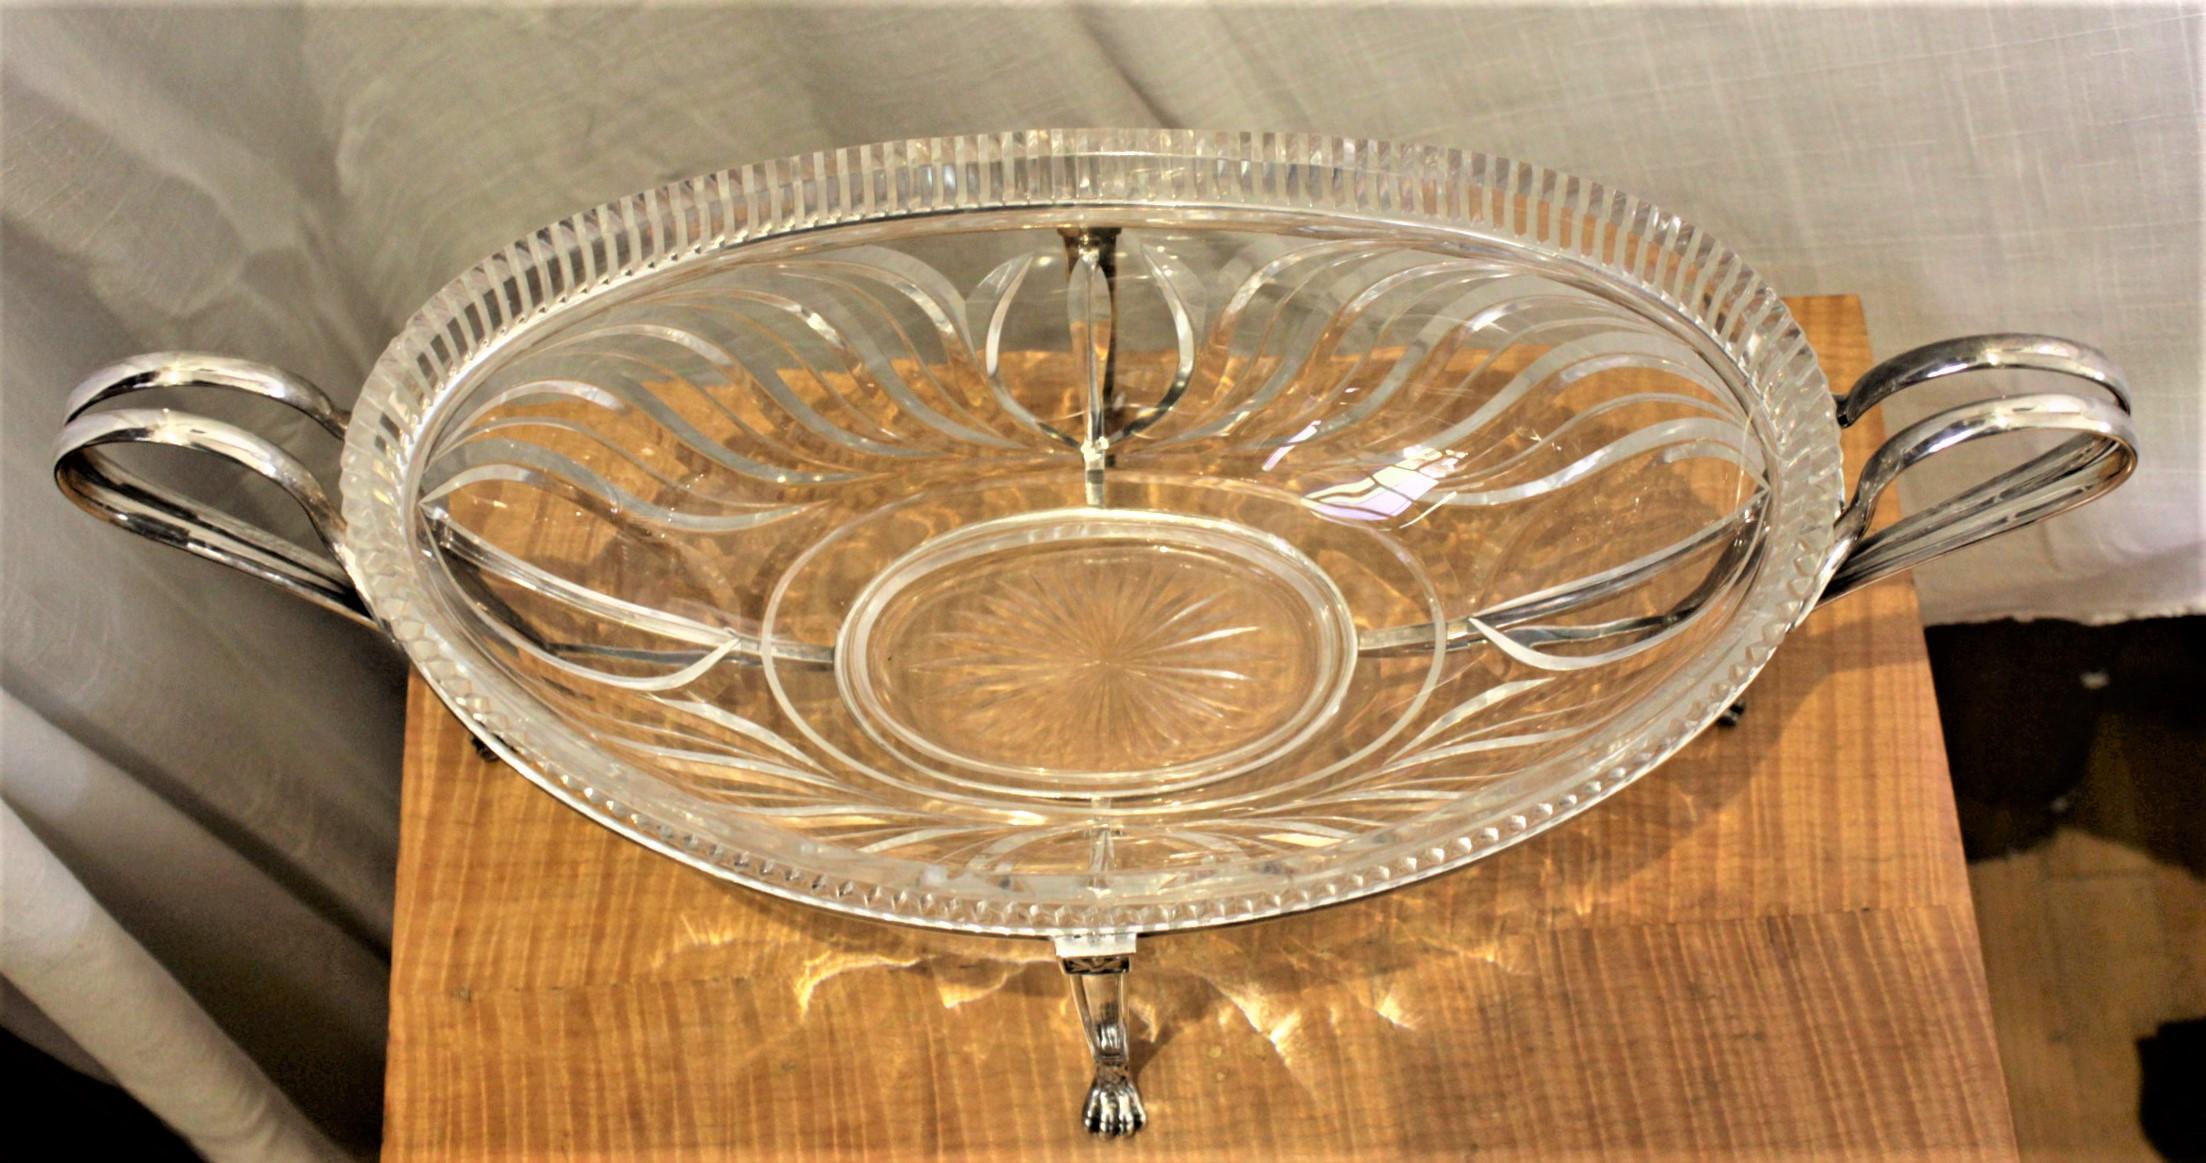 Antique Anglo-Irish Cut Crystal Centerpiece Bowl with Silver Plated Stand For Sale 2